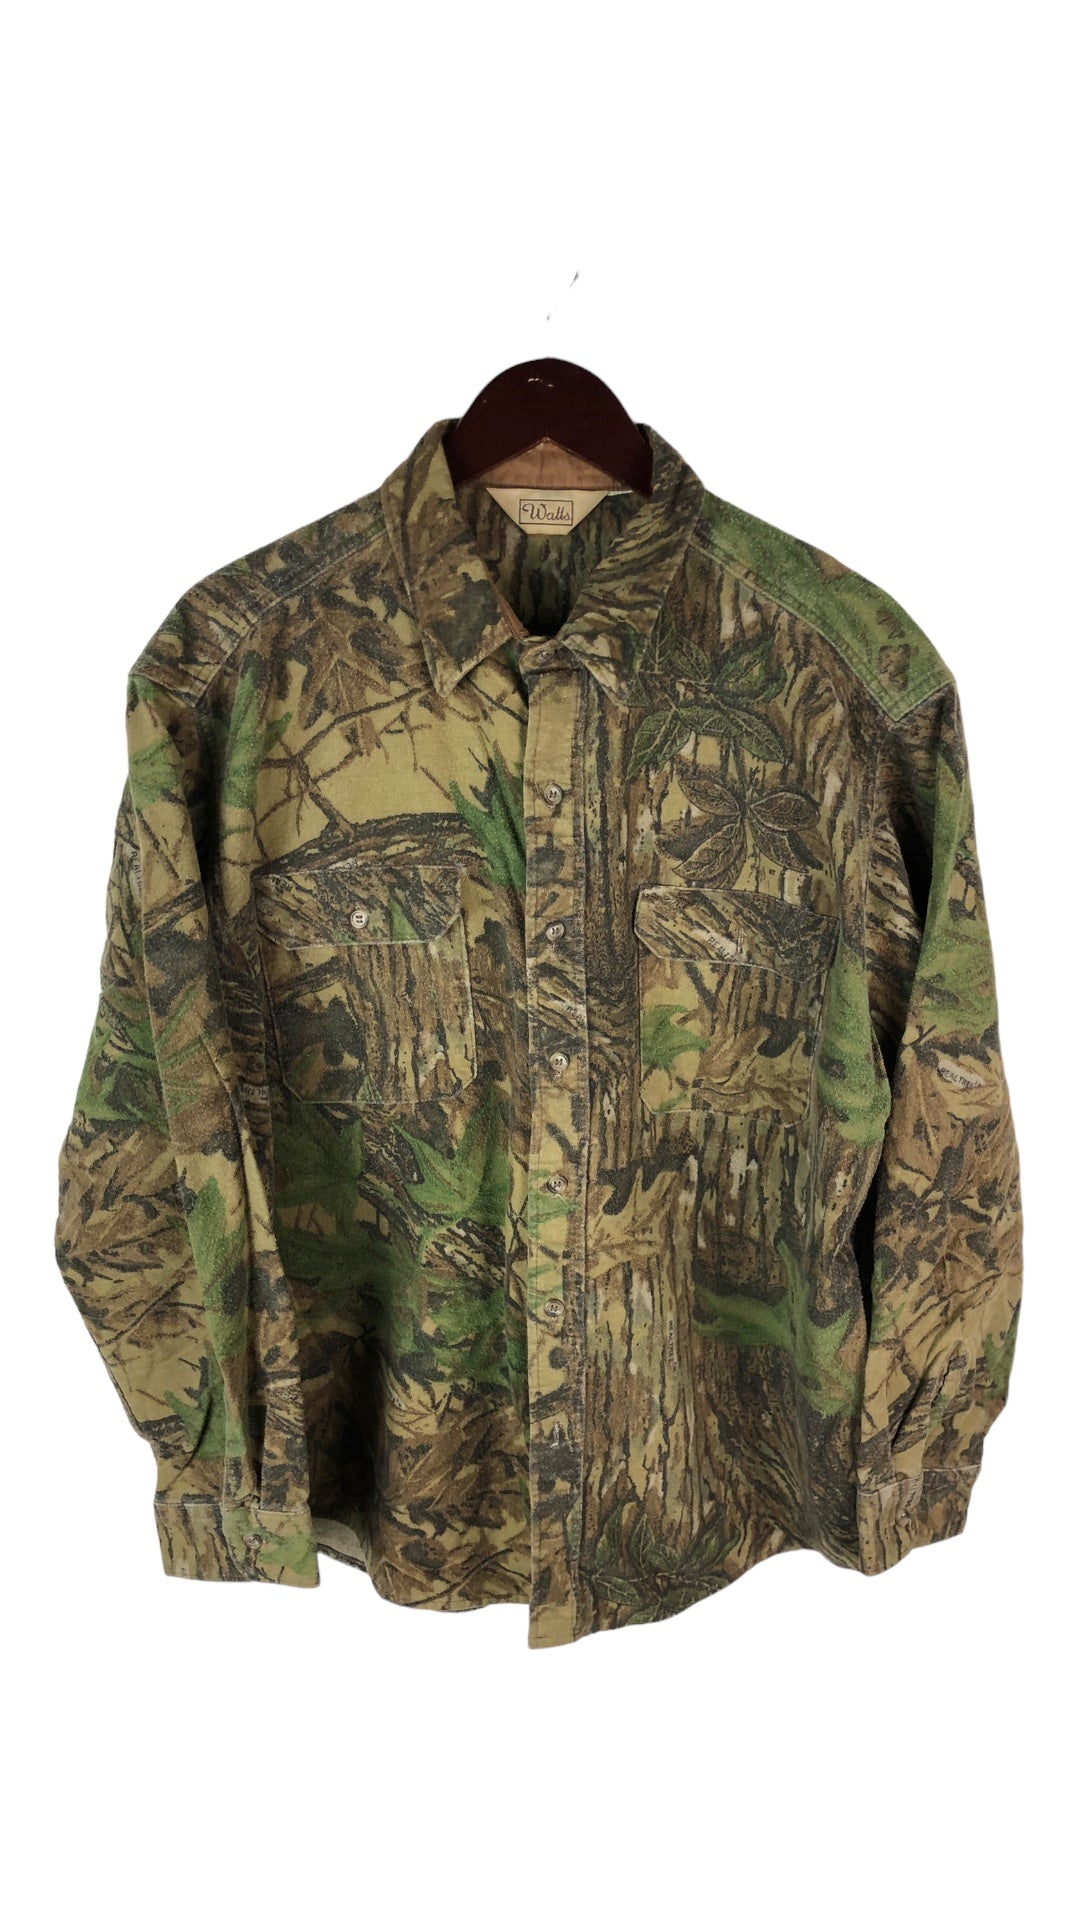 Load image into Gallery viewer, VTG Walls Camo Hunting Button Up L/S Shirt Sz L/XL
